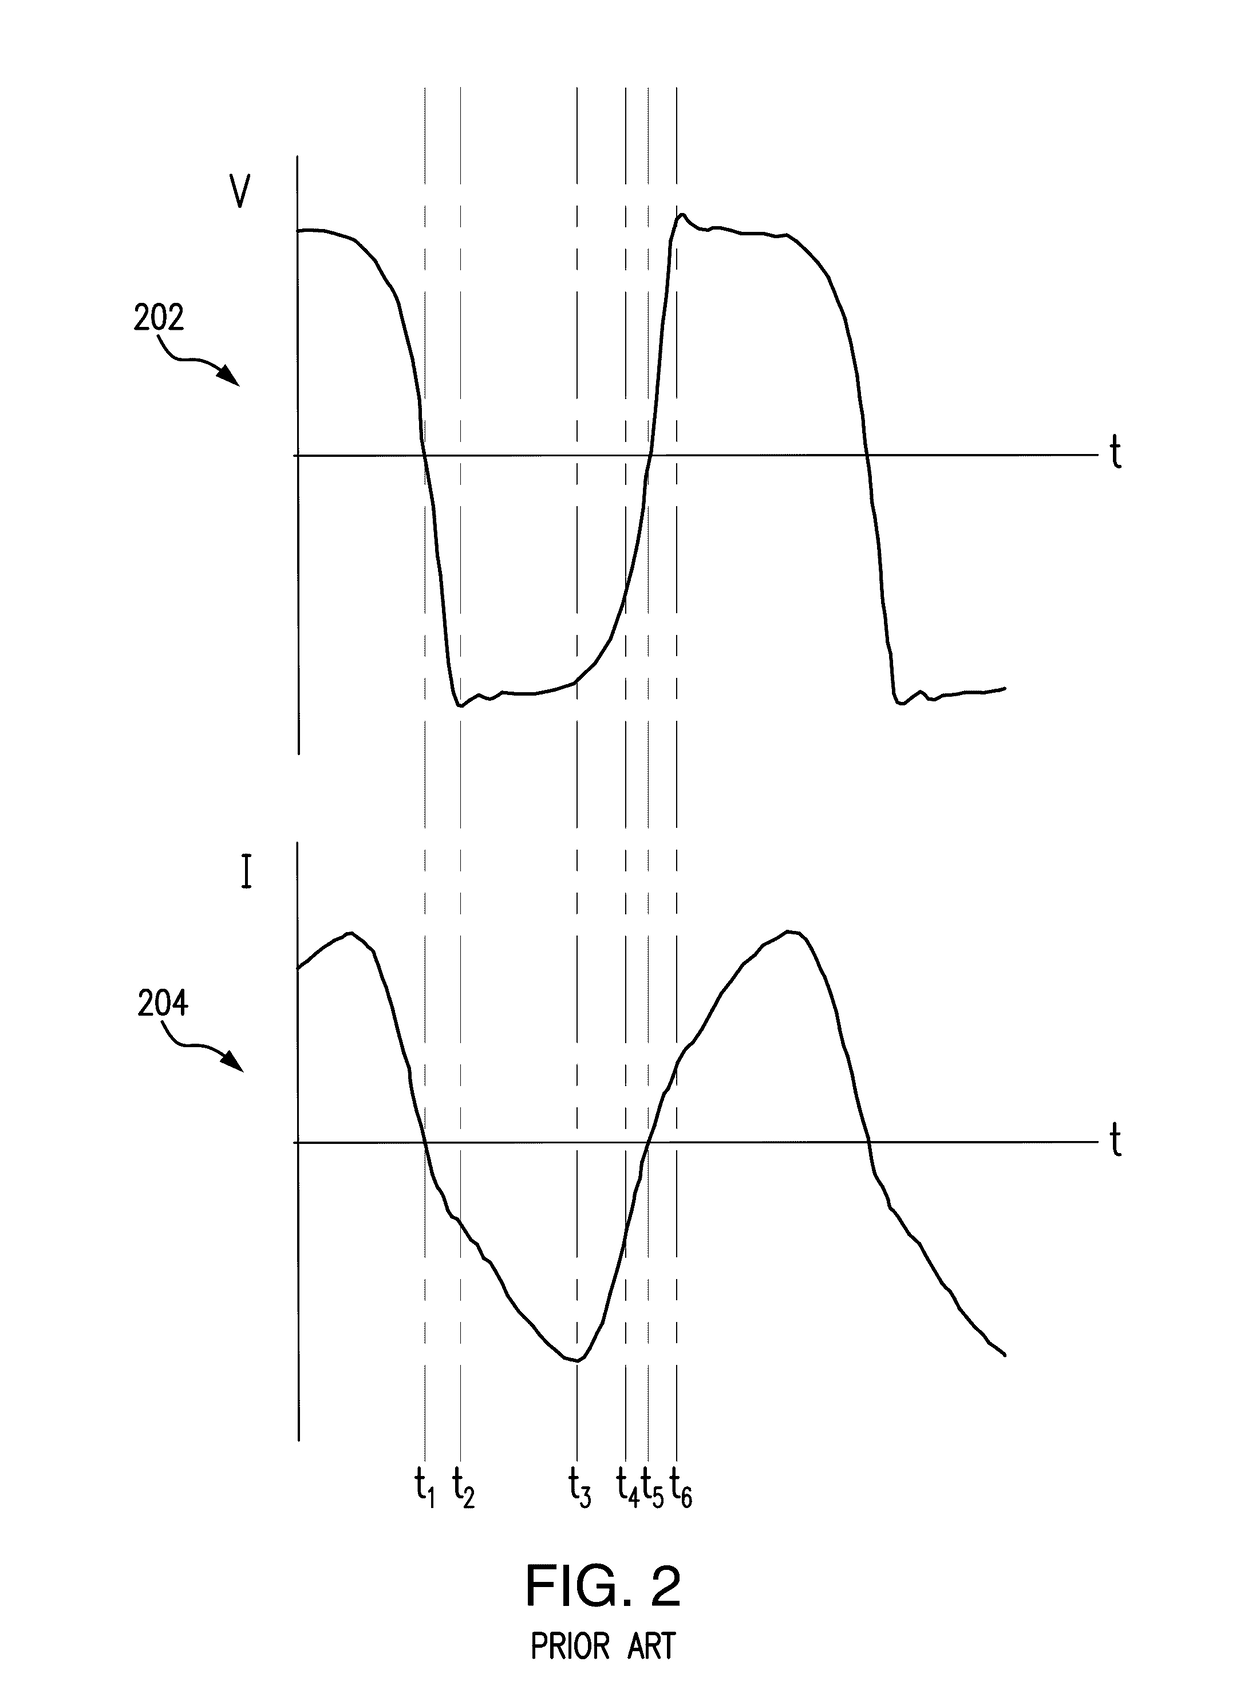 Plasma device driven by multiple-phase alternating or pulsed electrical current